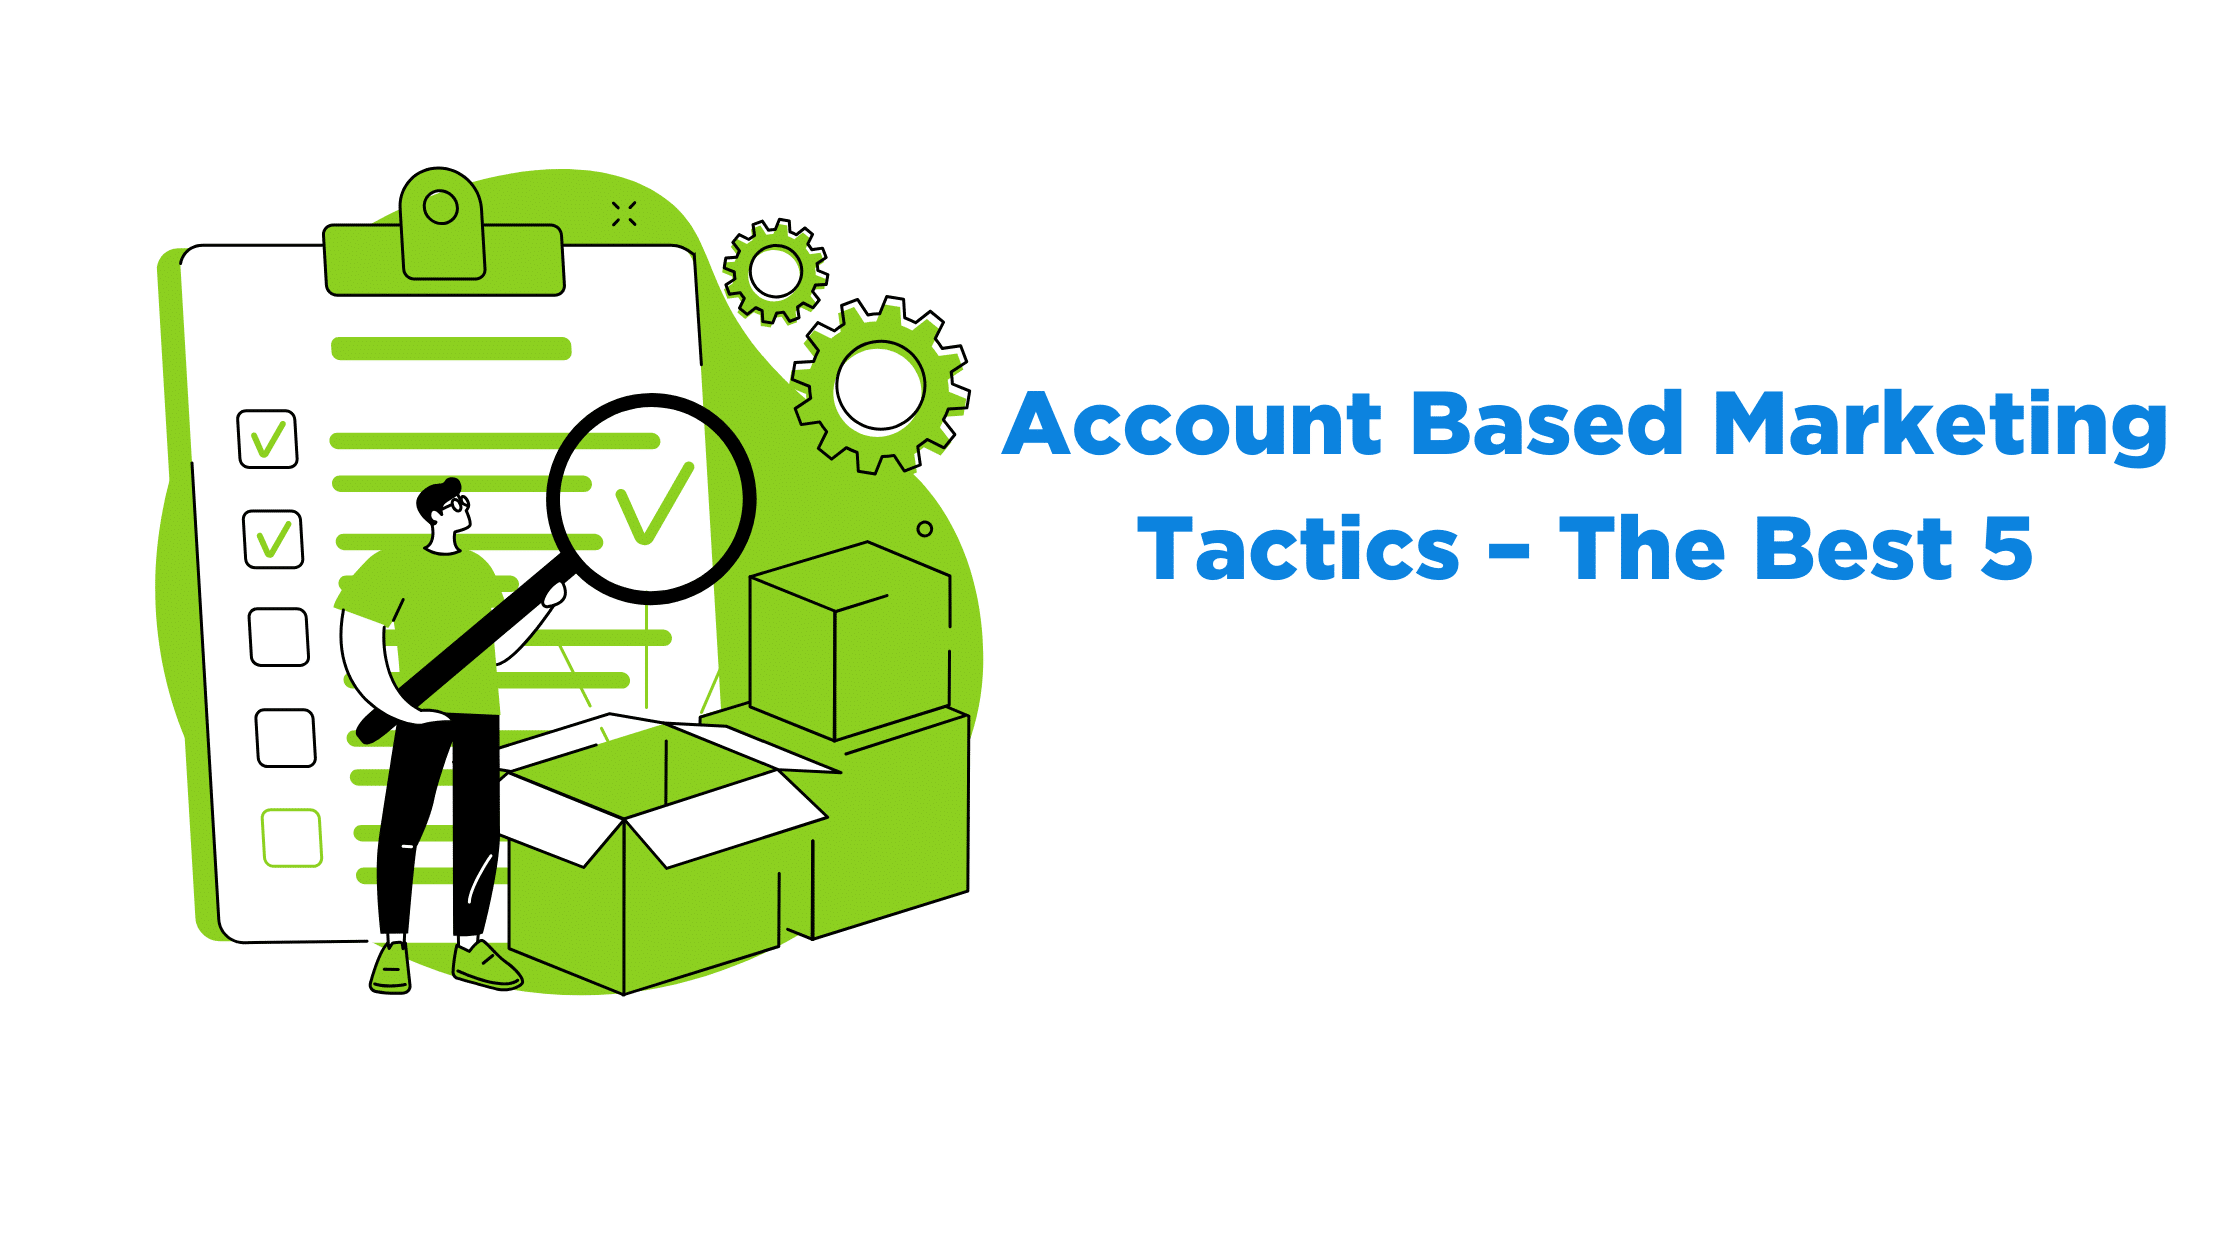 Account Based Marketing Tactics – The Best 5